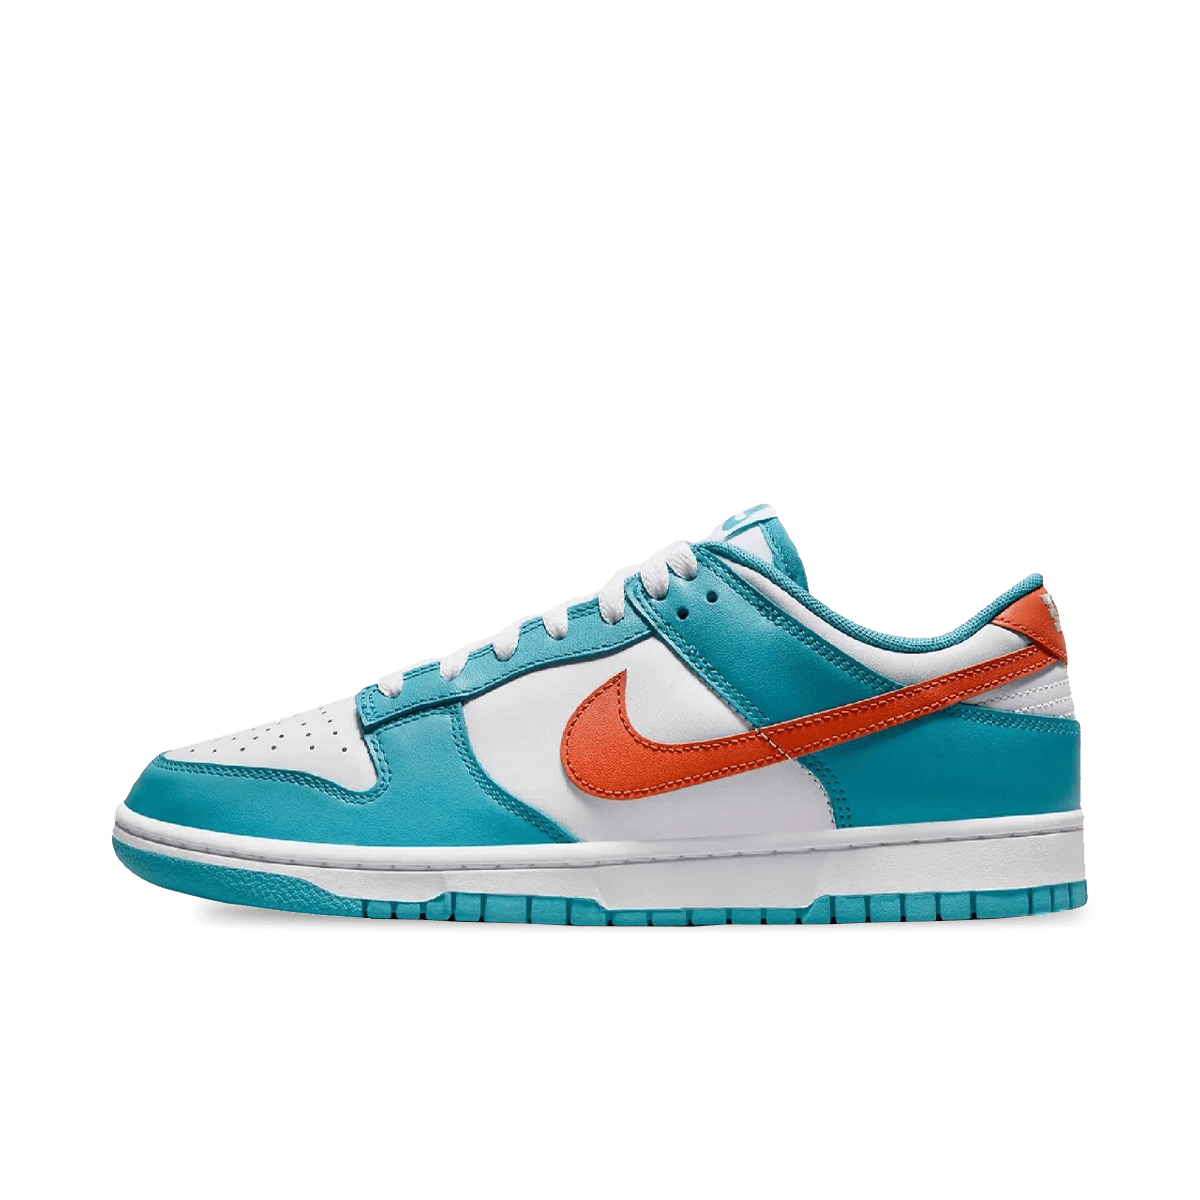 Dunk Low "Miami Dolphins"